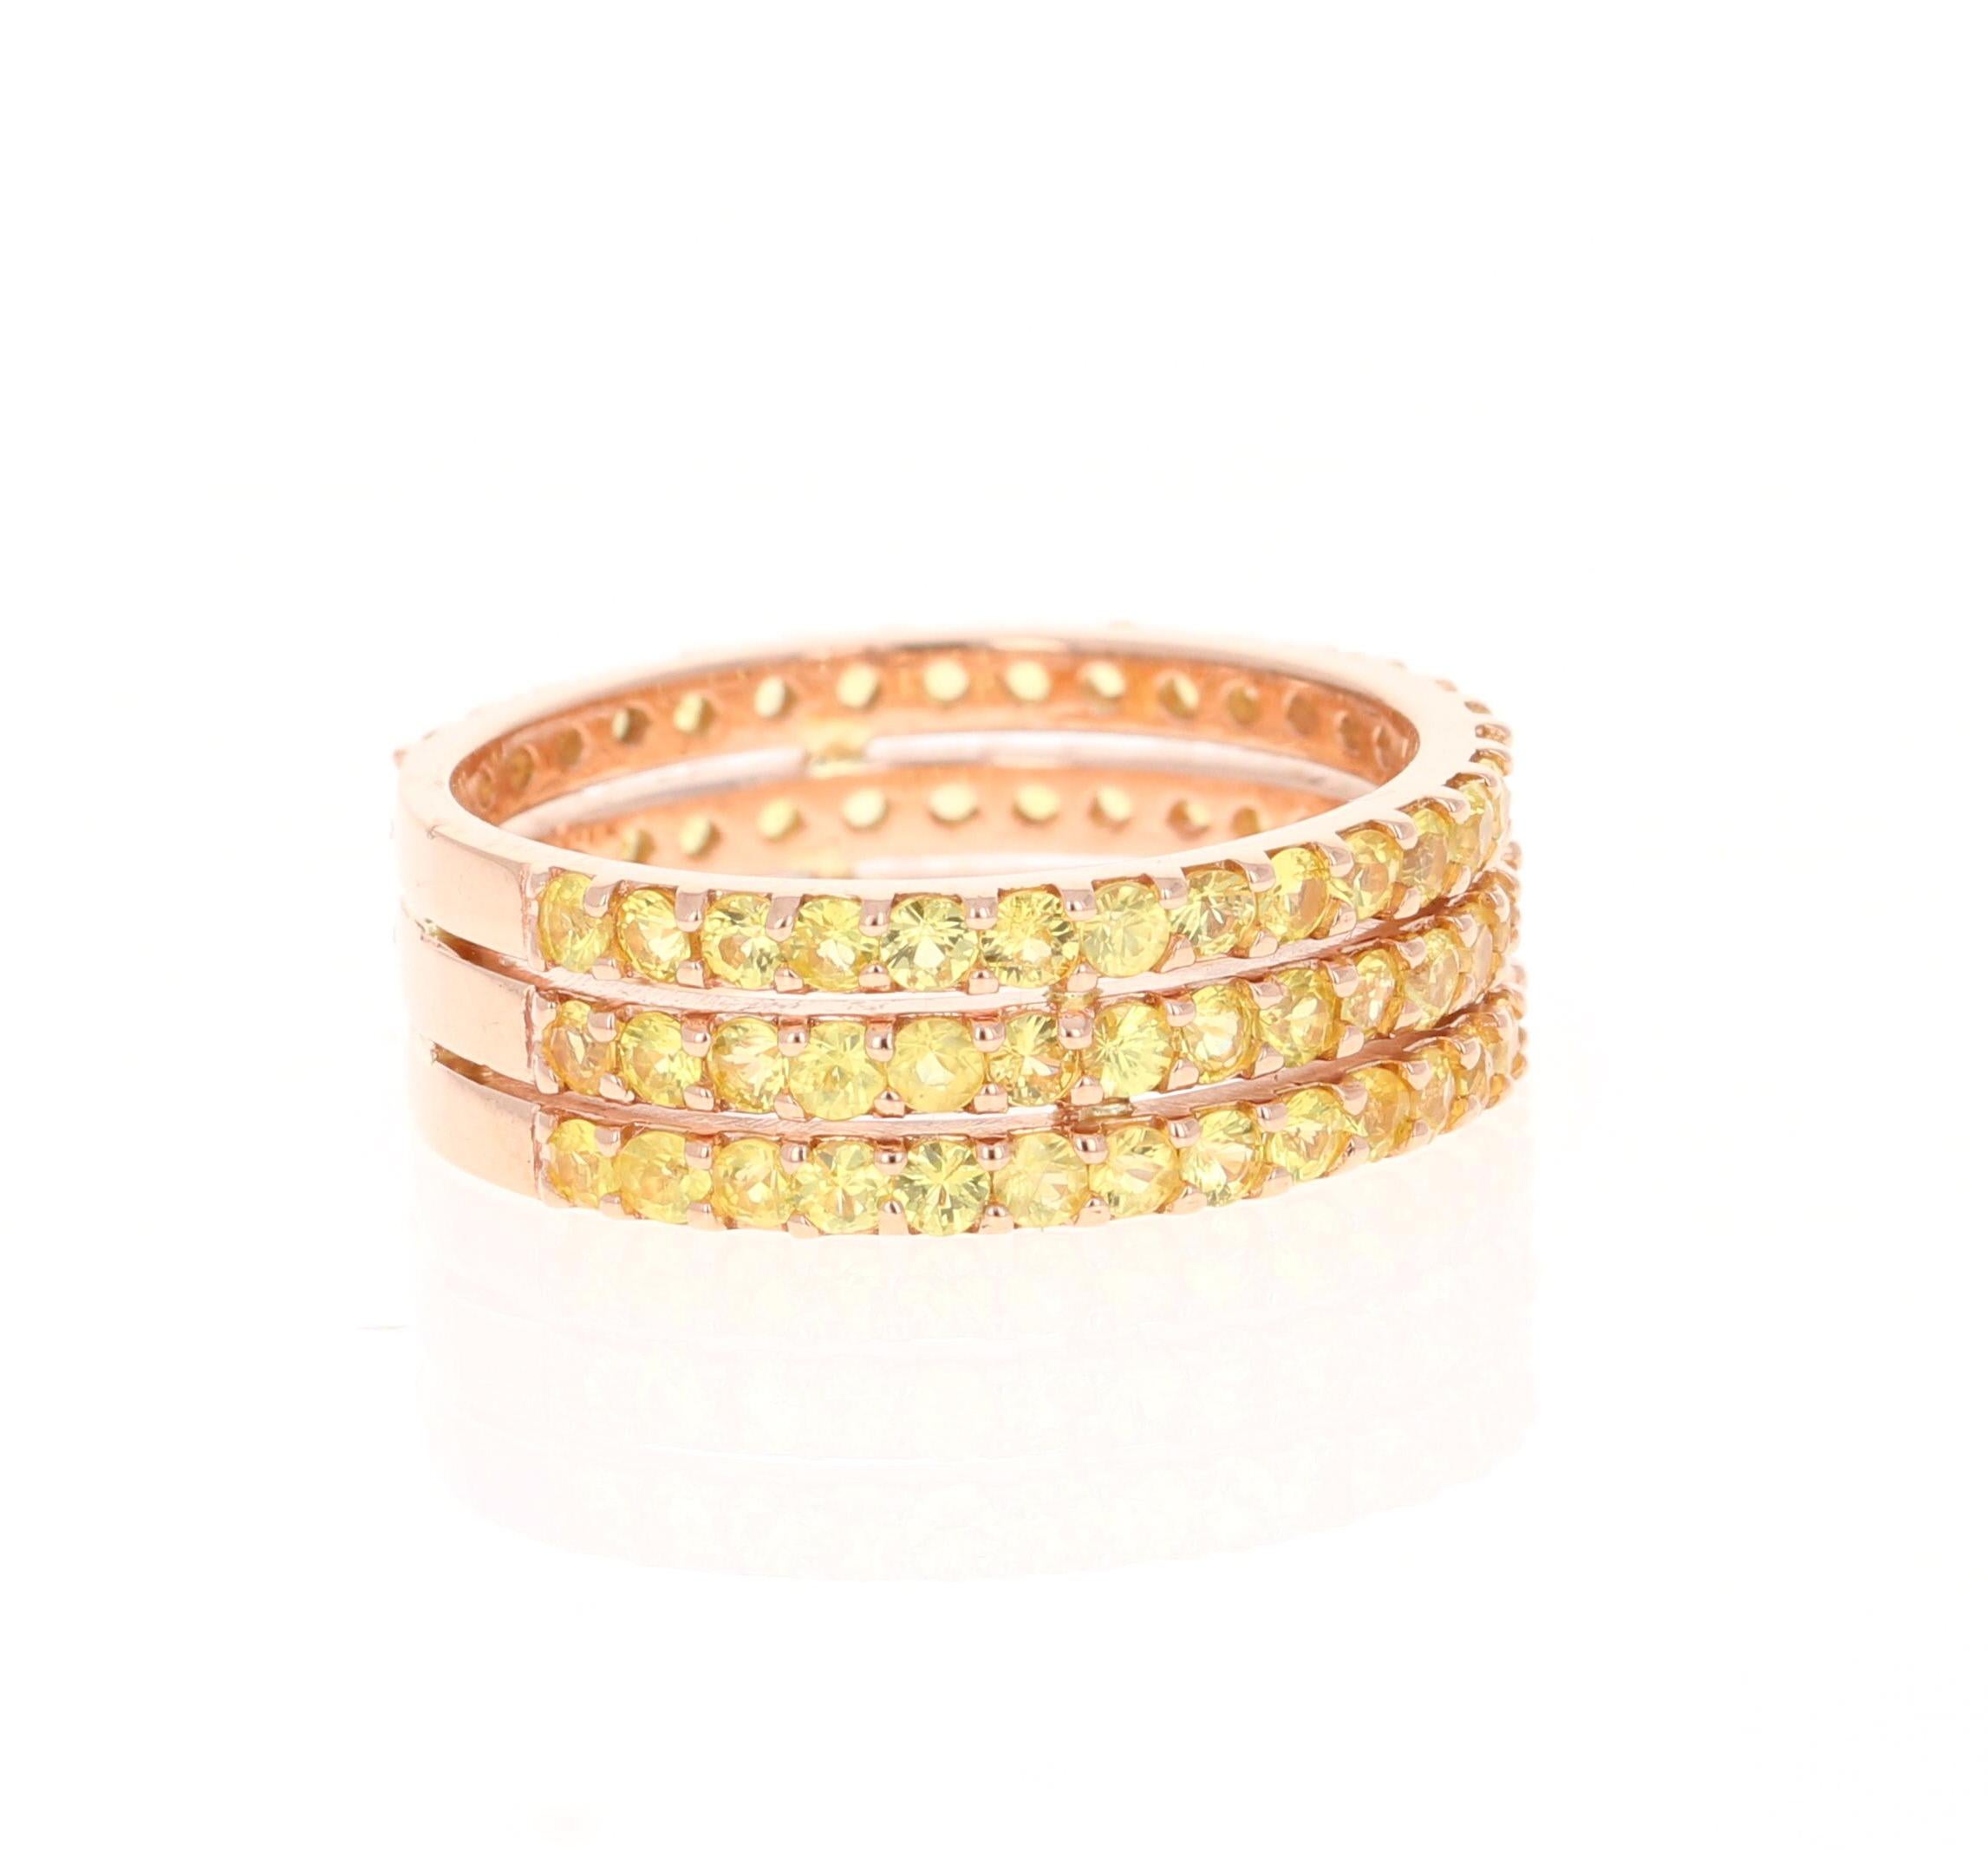 This ring has 90 Natural Round Cut Yellow Sapphires that weigh 2.46 Carats. 

Crafted in 14 Karat Rose Gold and weighs approximately 4.5 grams 

The ring is a size 7 and can be re-sized at no additional charge!